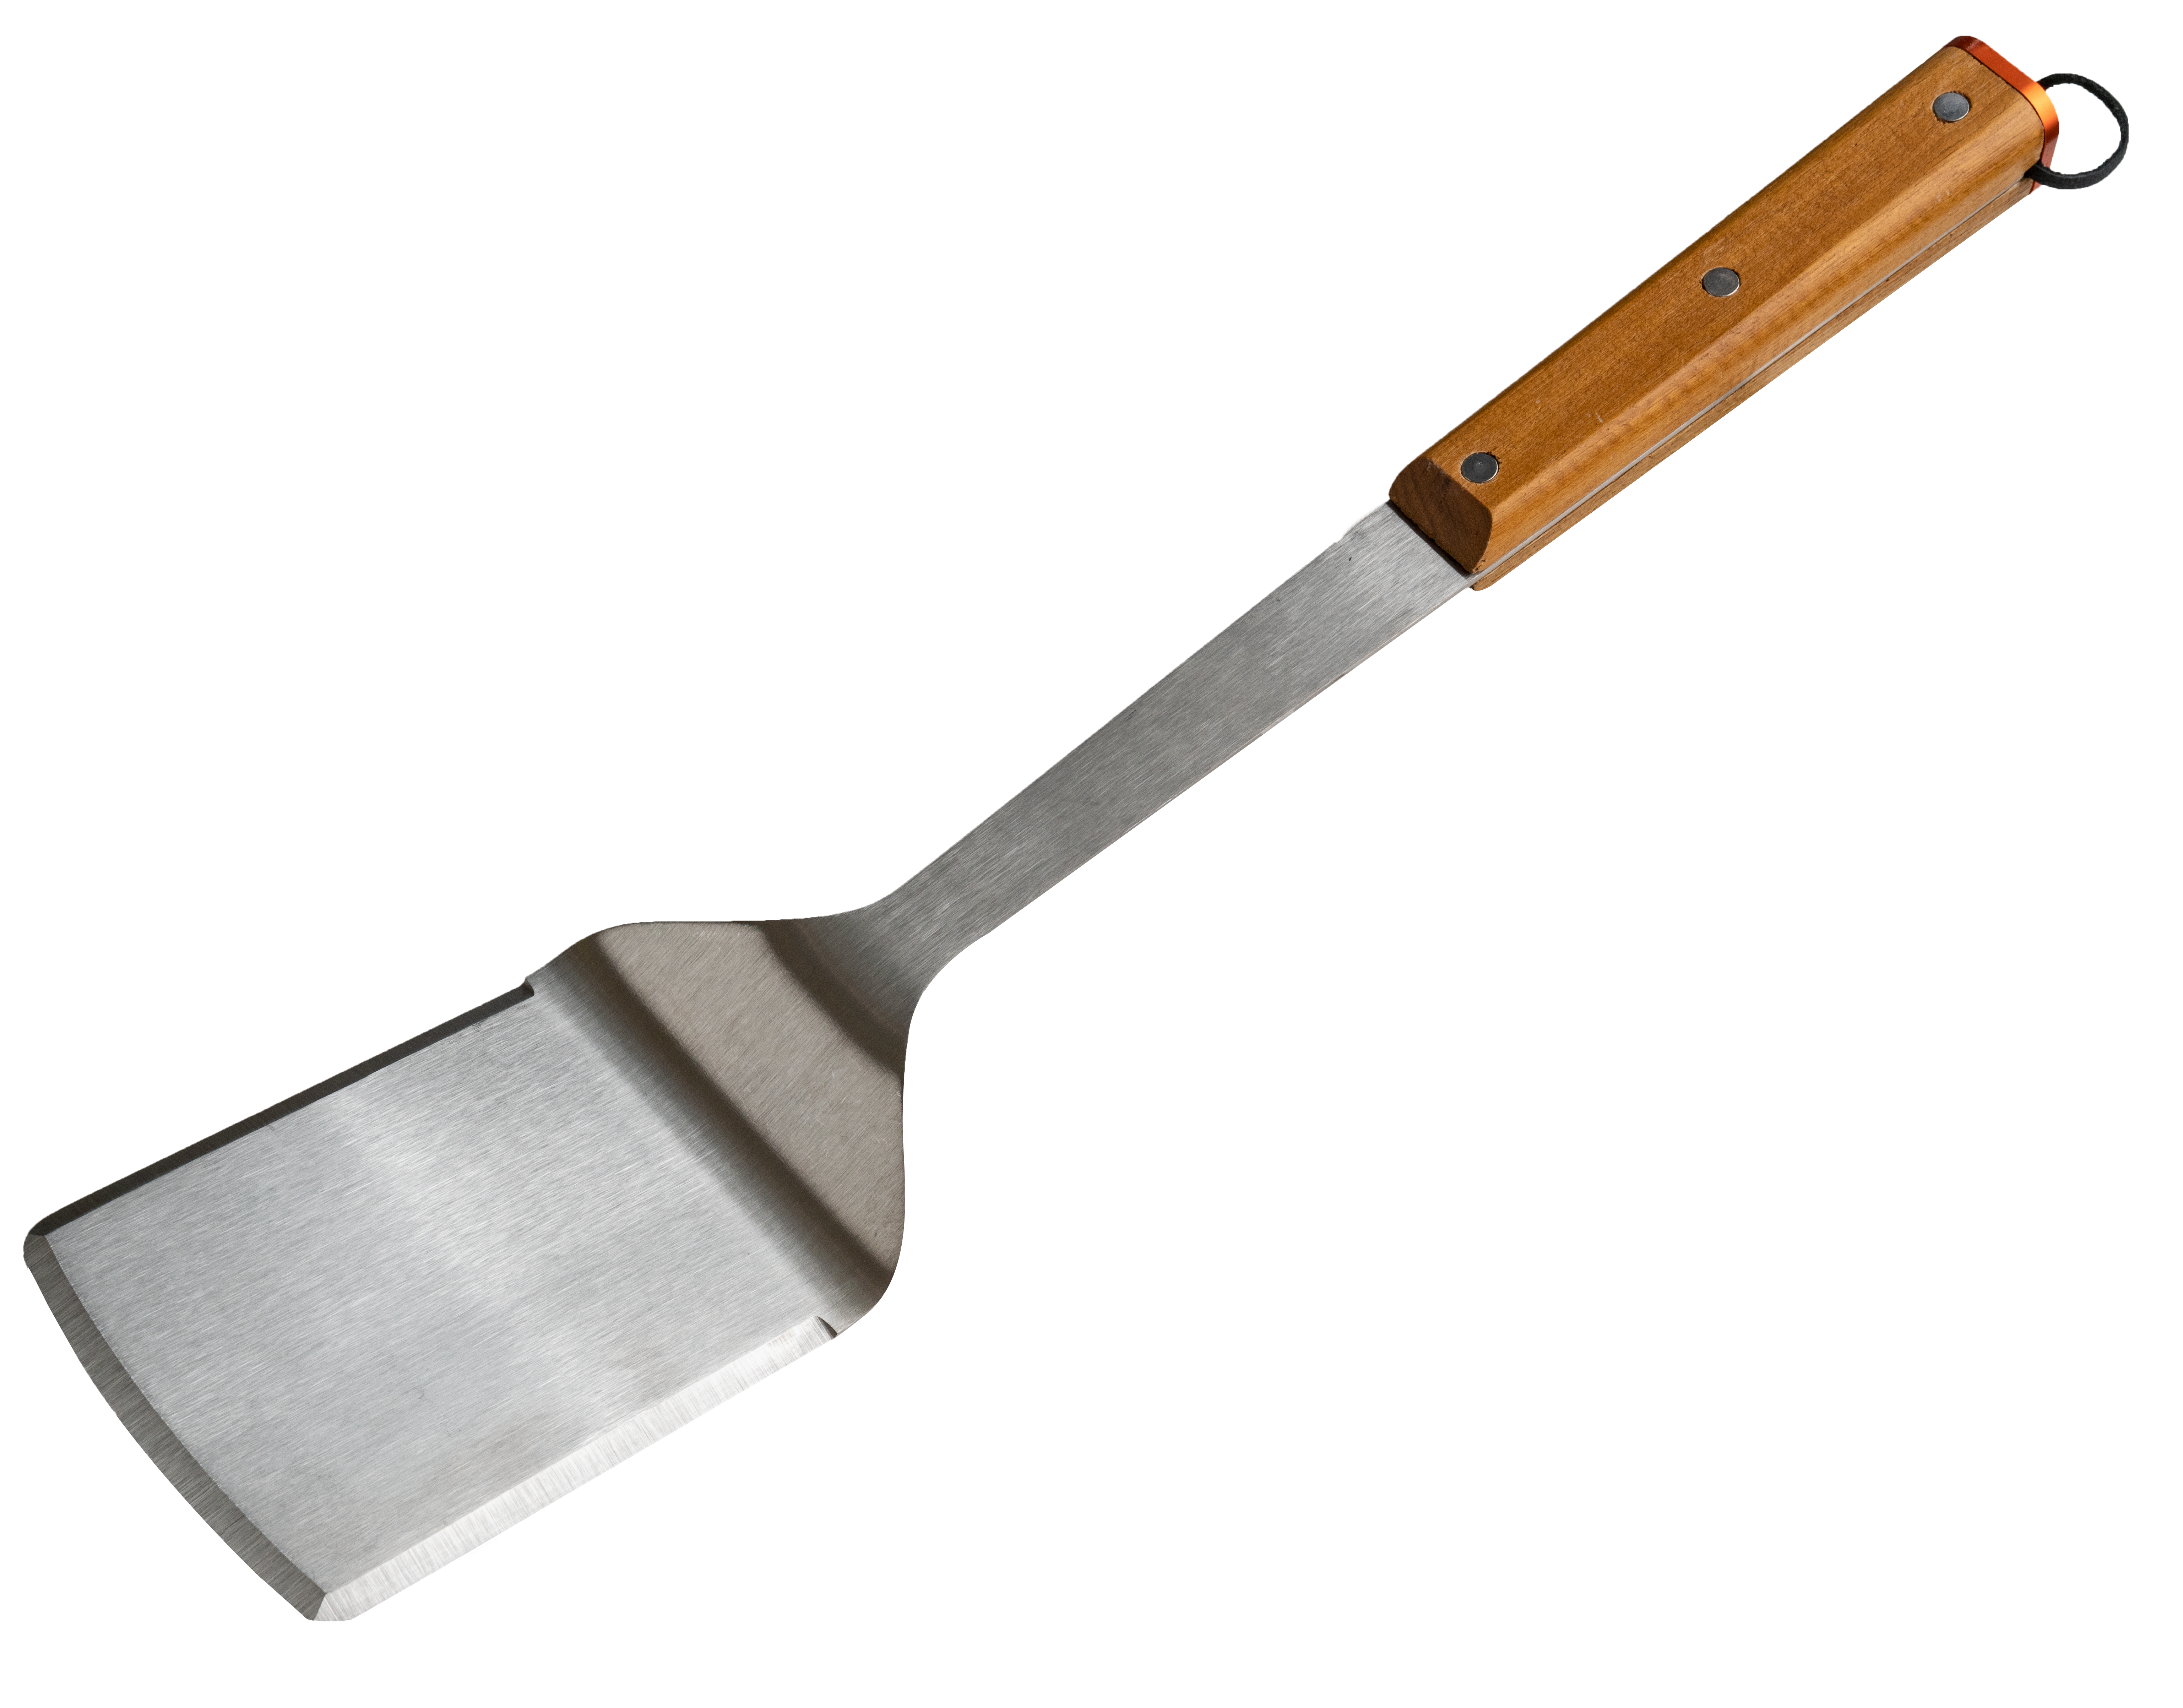 /assets/images/products/product-images/0Z7M7PR610ZMG/647fa8245d6ed_BBQ Spatula_002-6147x4810-20435be.png